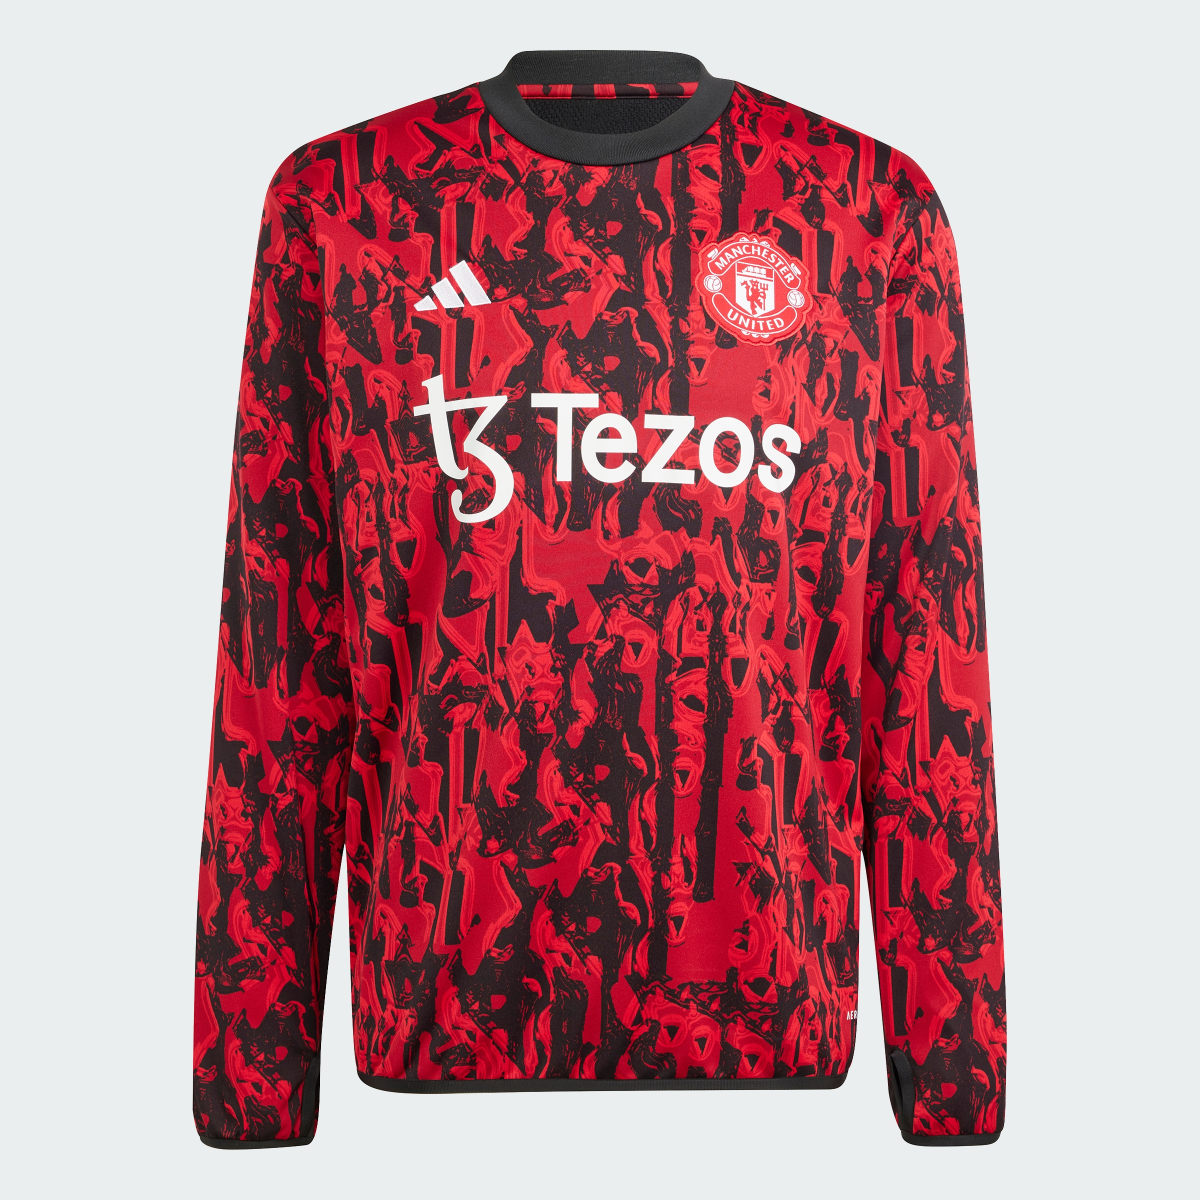 Adidas Manchester United Pre-Match Warm Top. 5